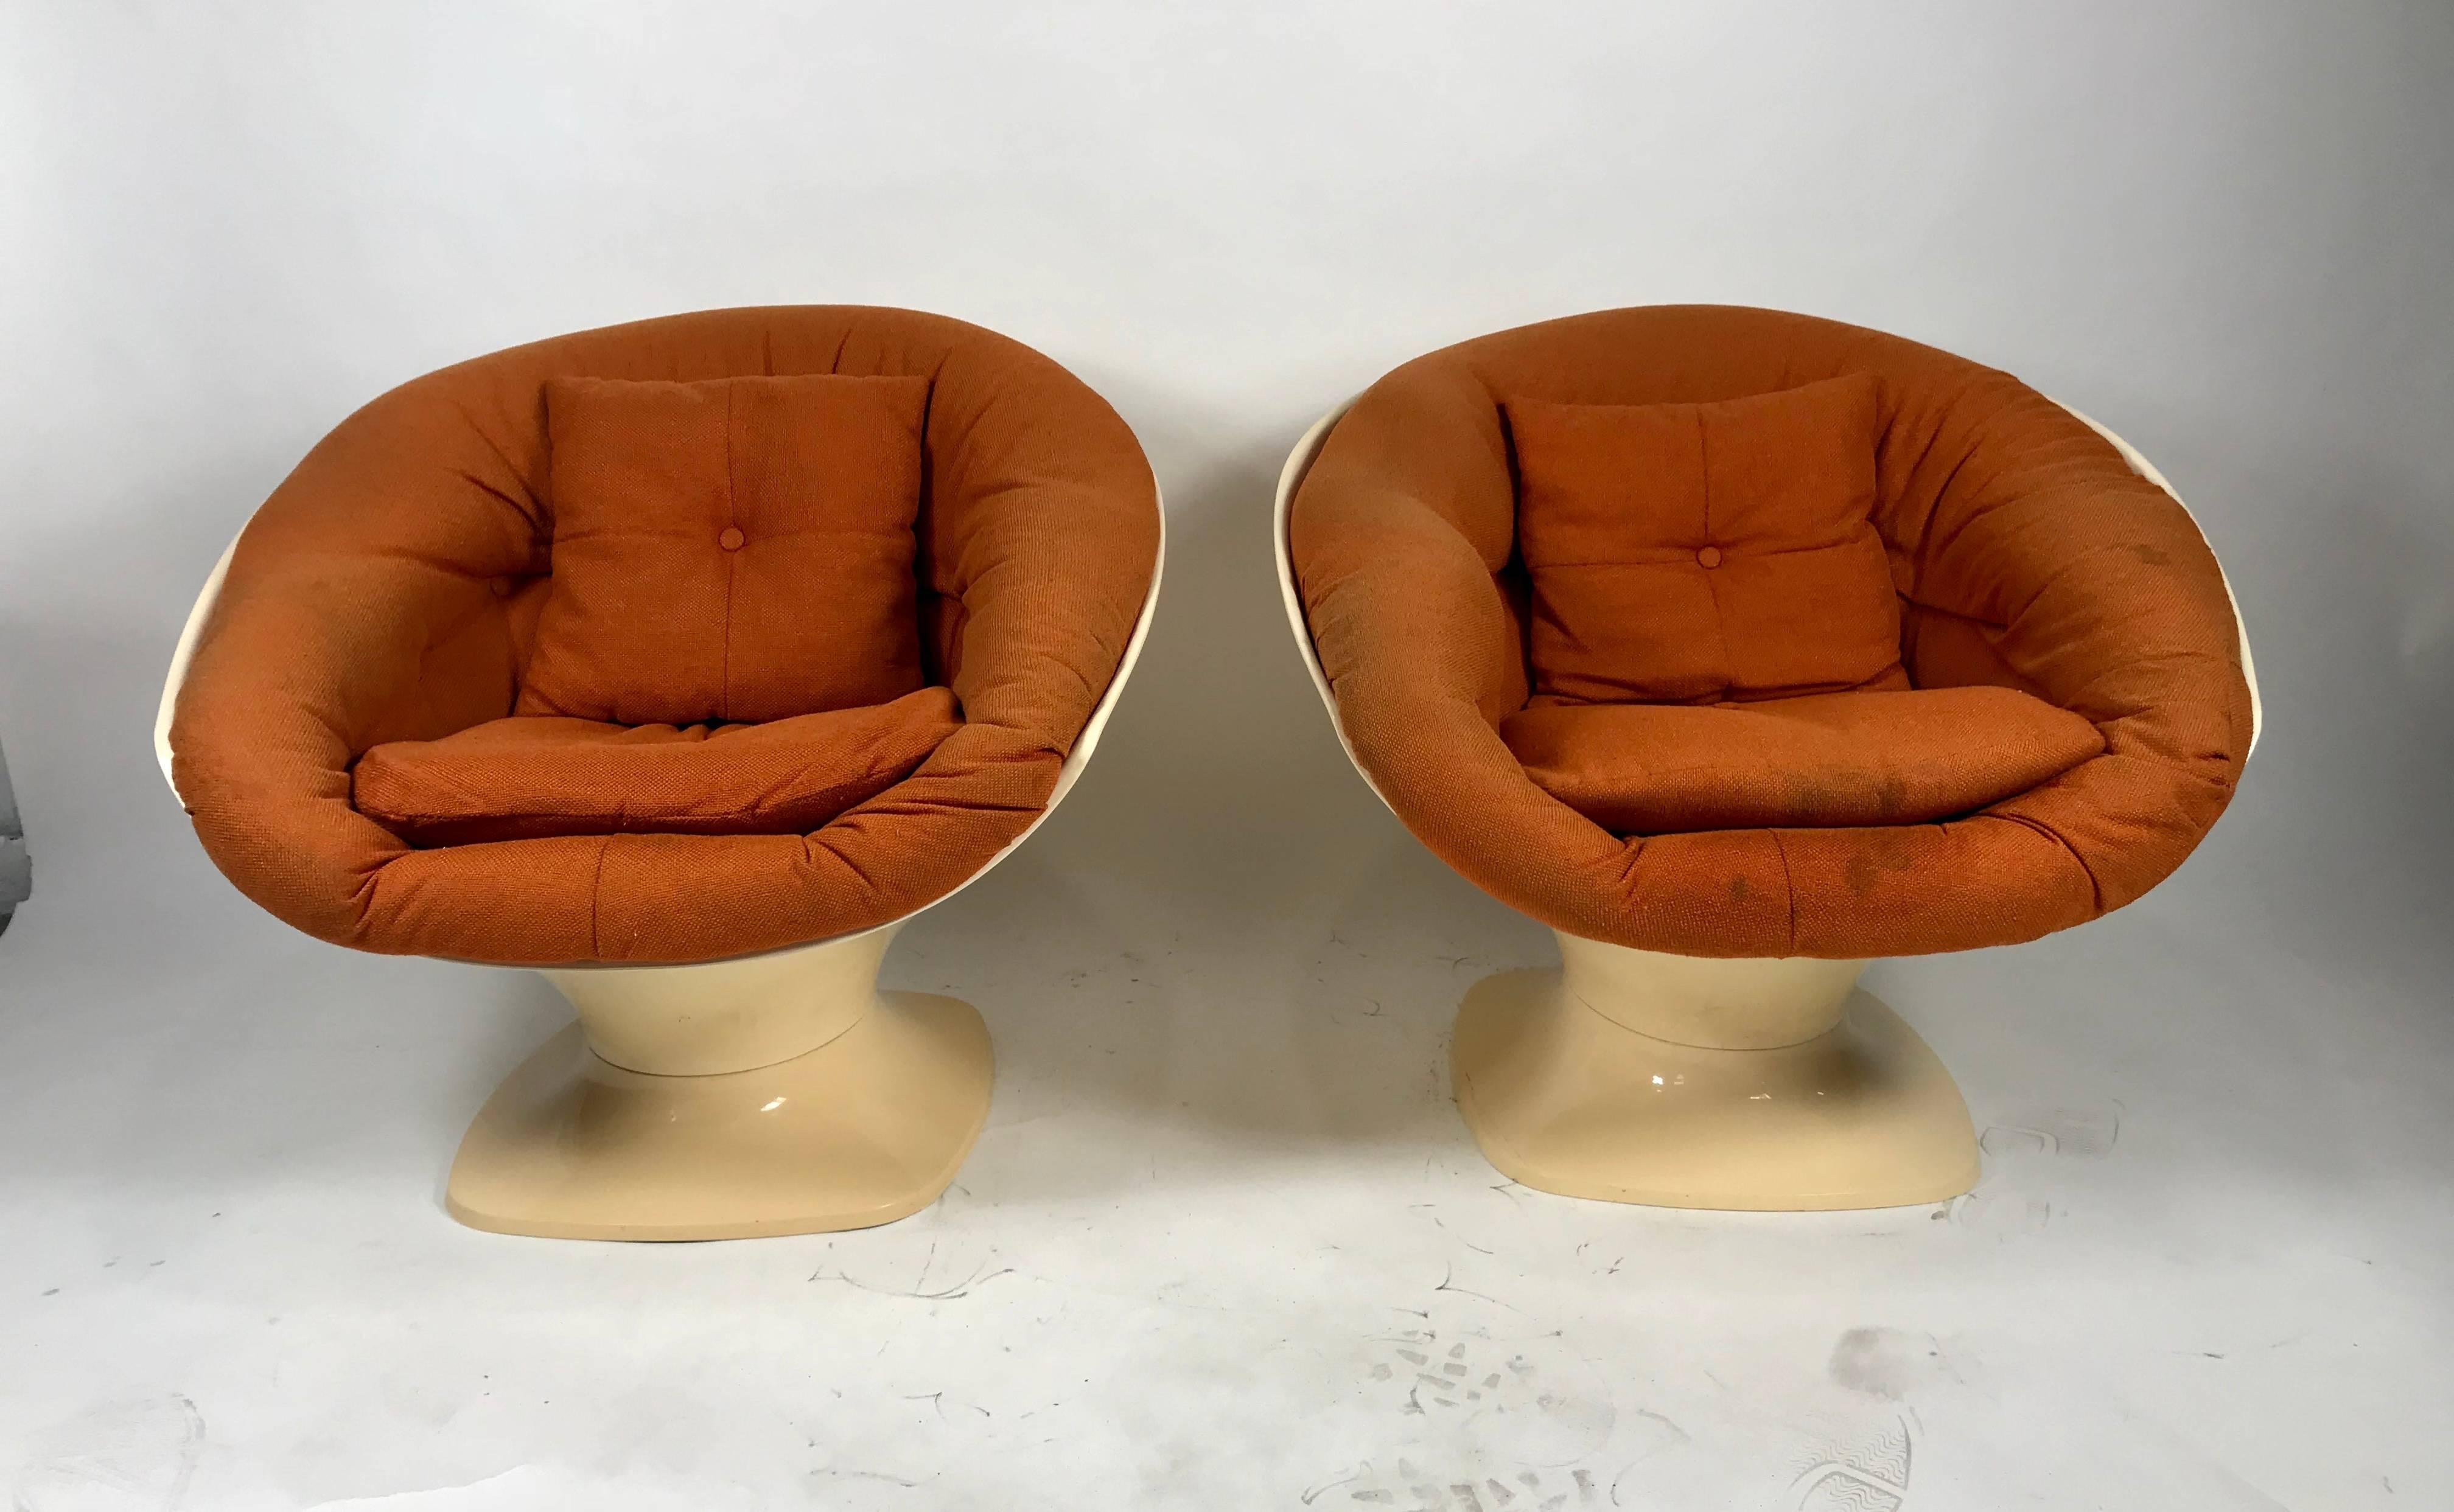 Stunning pair of resin armchairs complete with their original tangerine wool upholstery by famous French decorator 'Raphael. Hand delivery avail to New York City or anywhere en route from Buffalo New York.